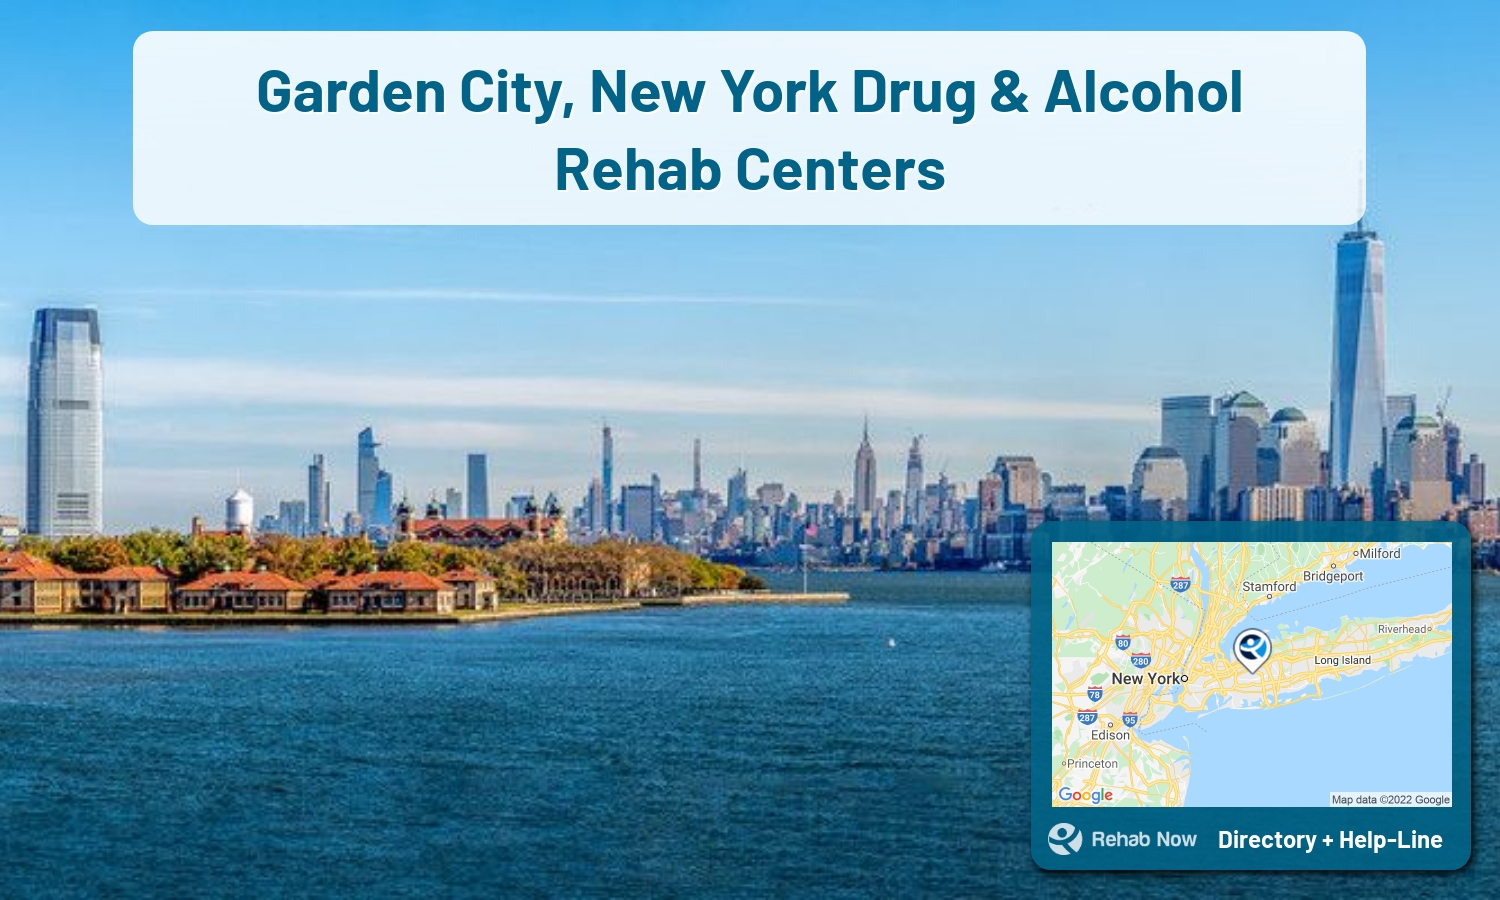 Find drug rehab and alcohol treatment services in Garden City. Our experts help you find a center in Garden City, New York